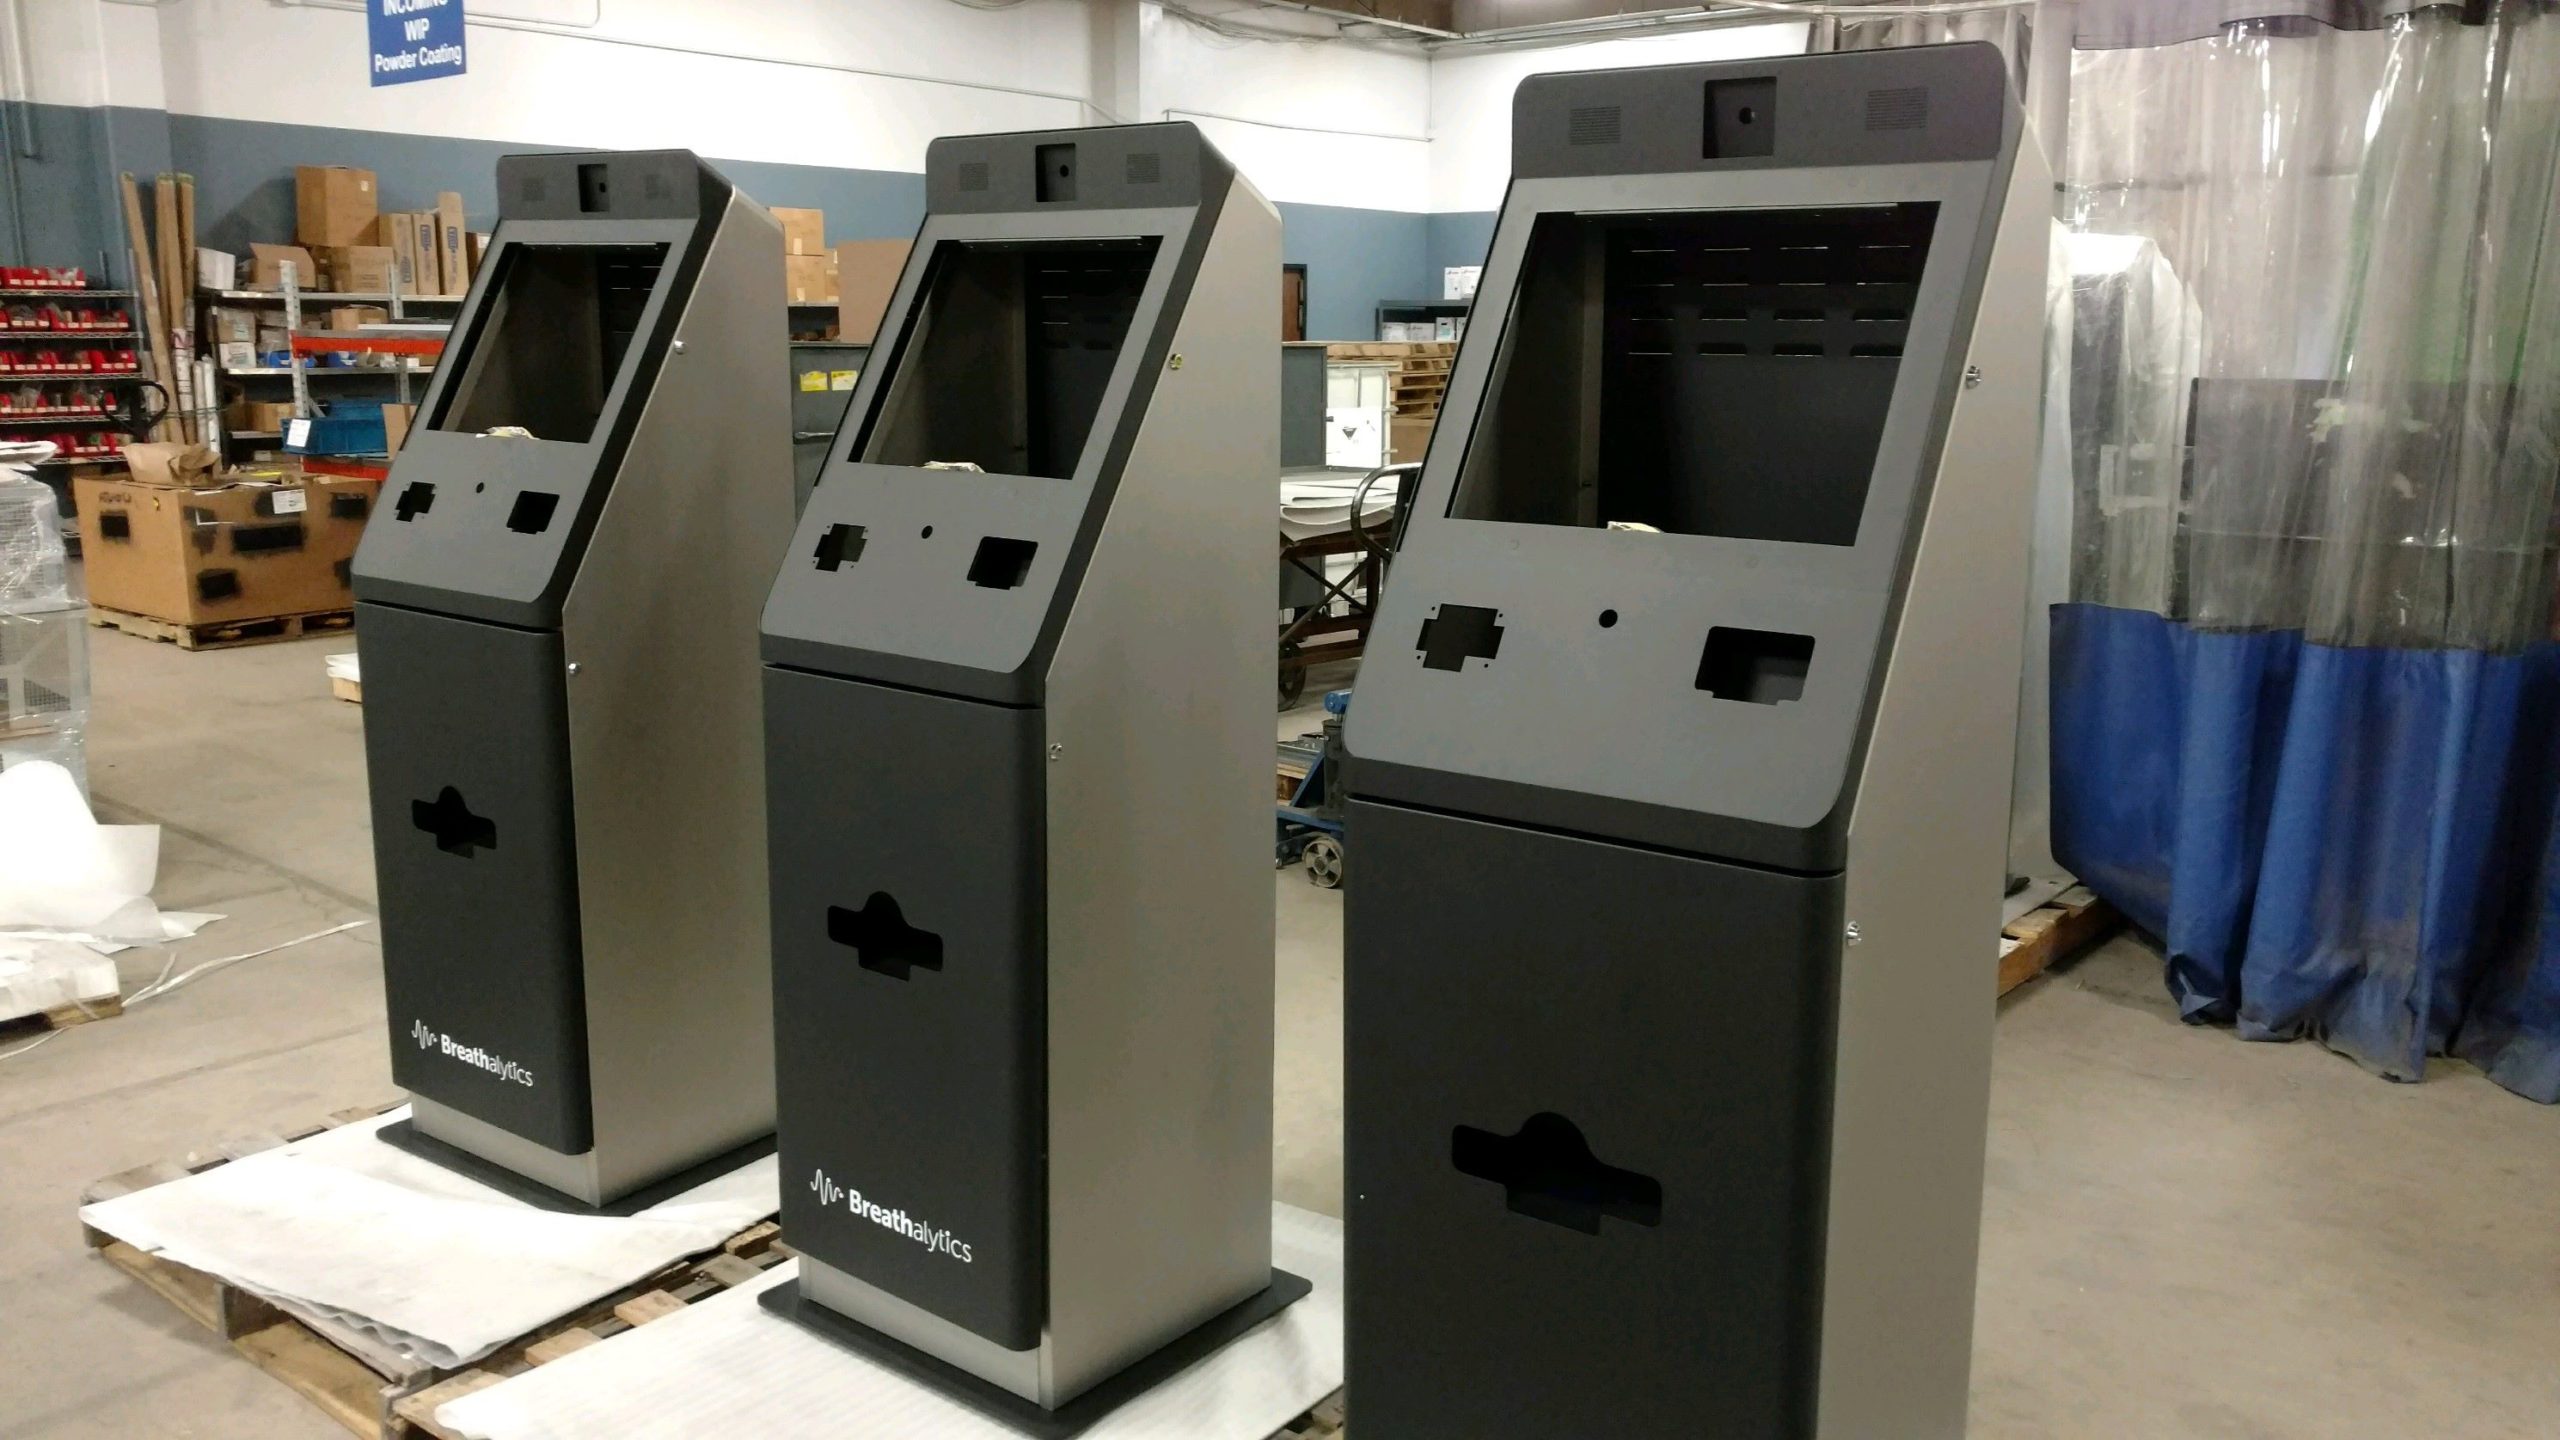 Completed kiosks